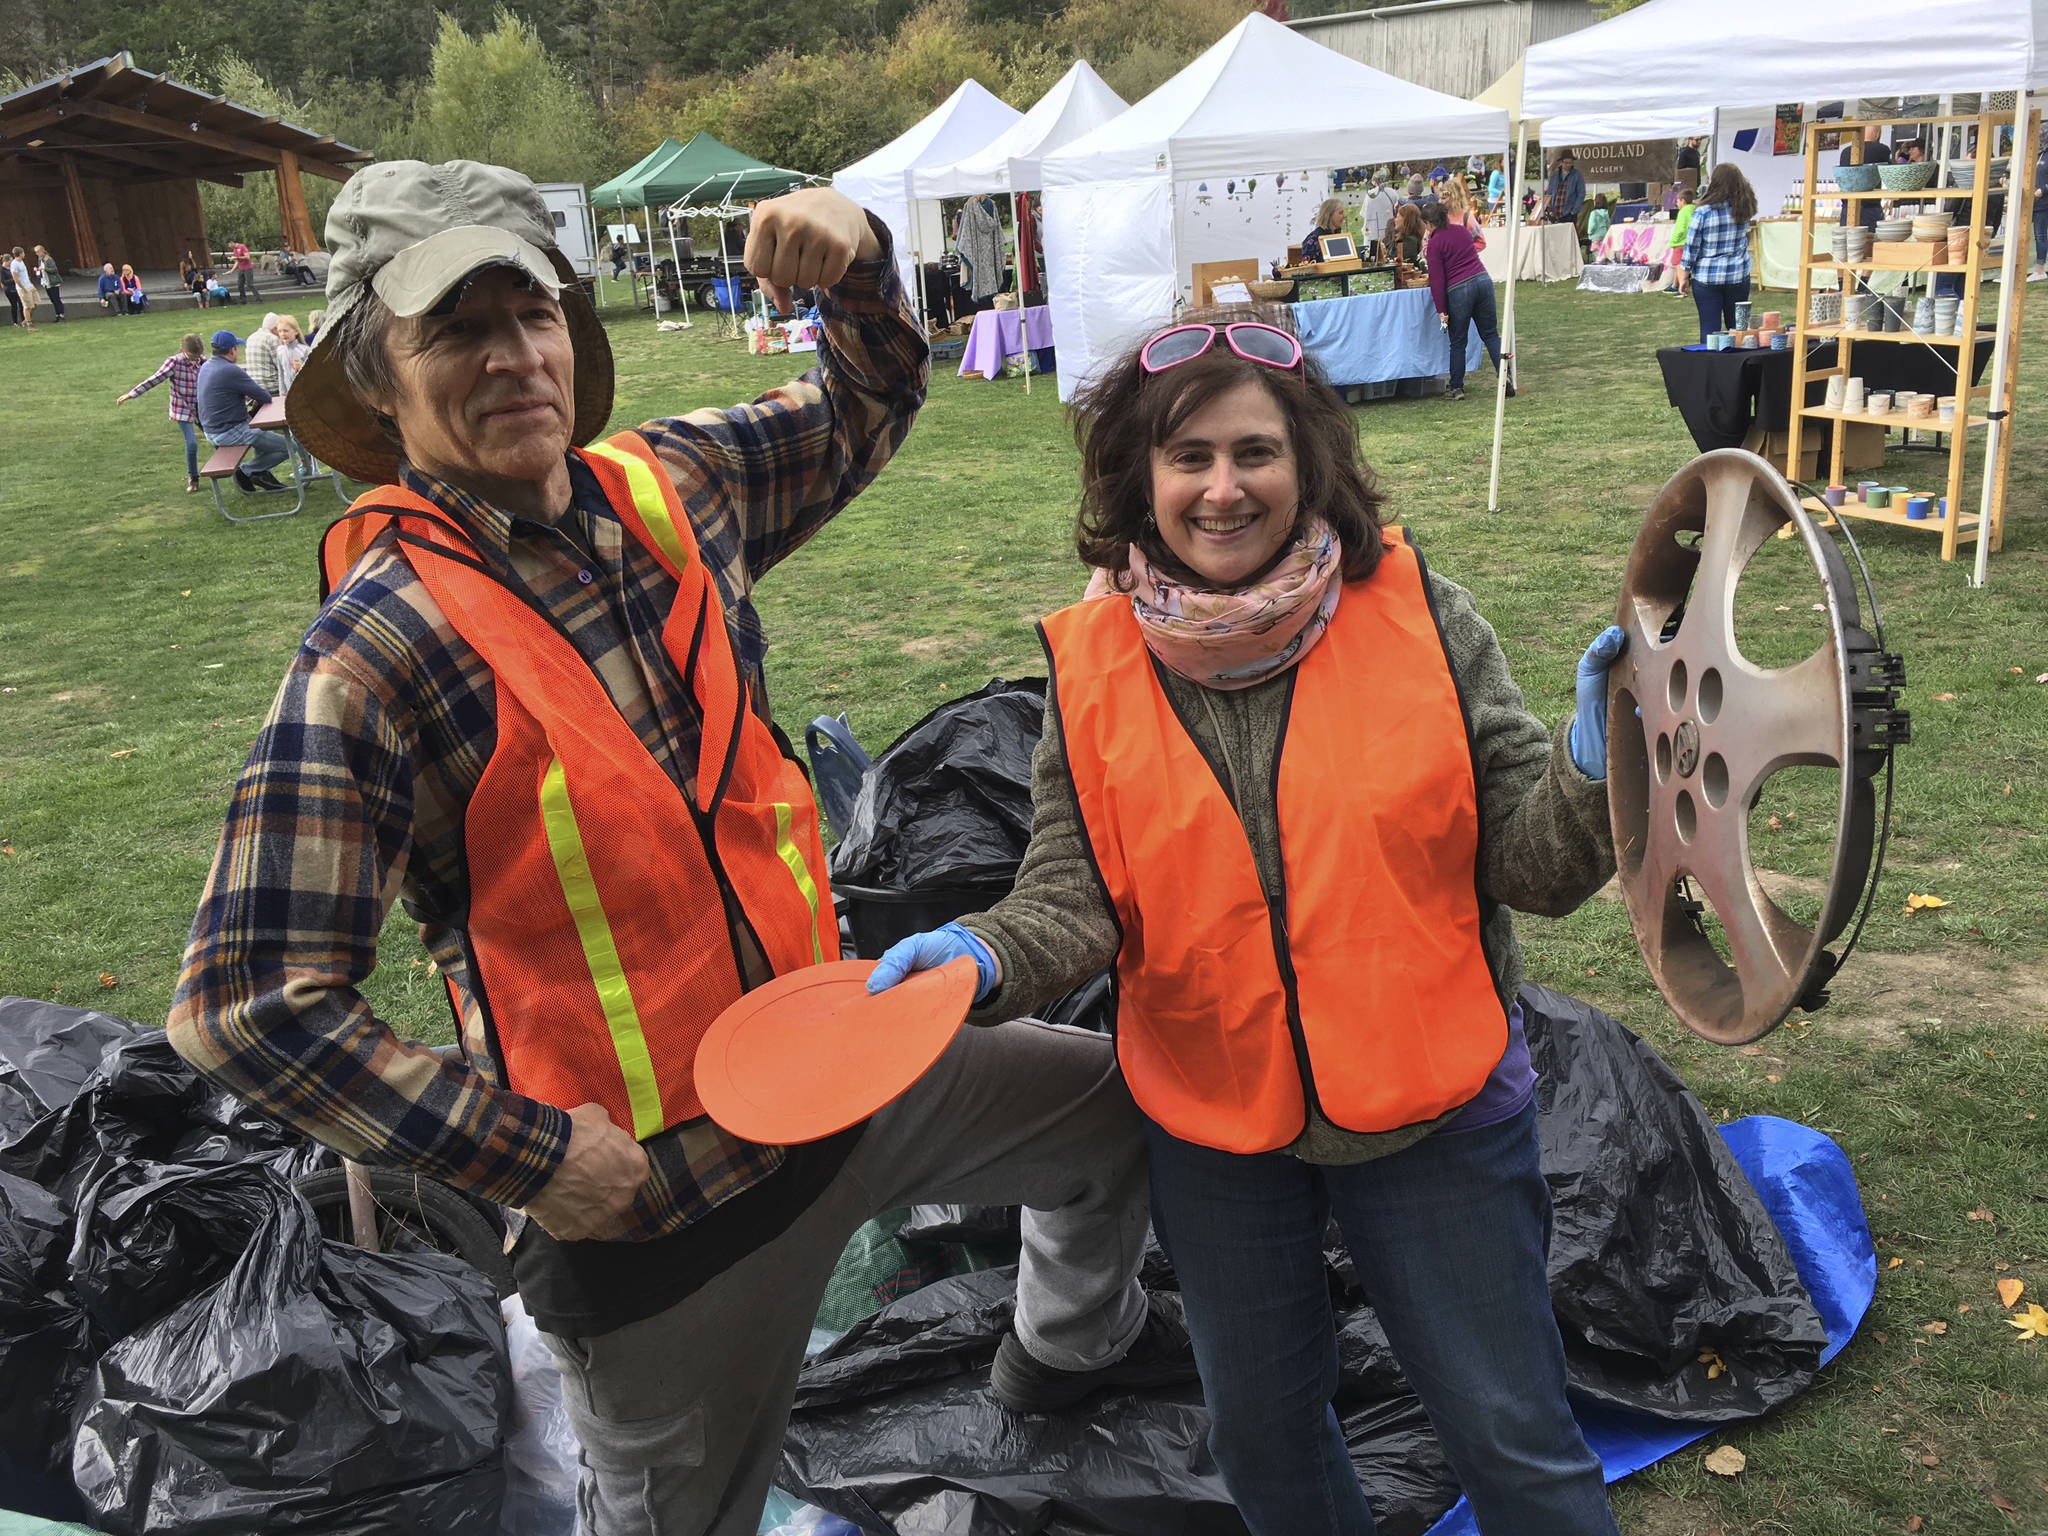 Pick up litter during Great Island Clean Up